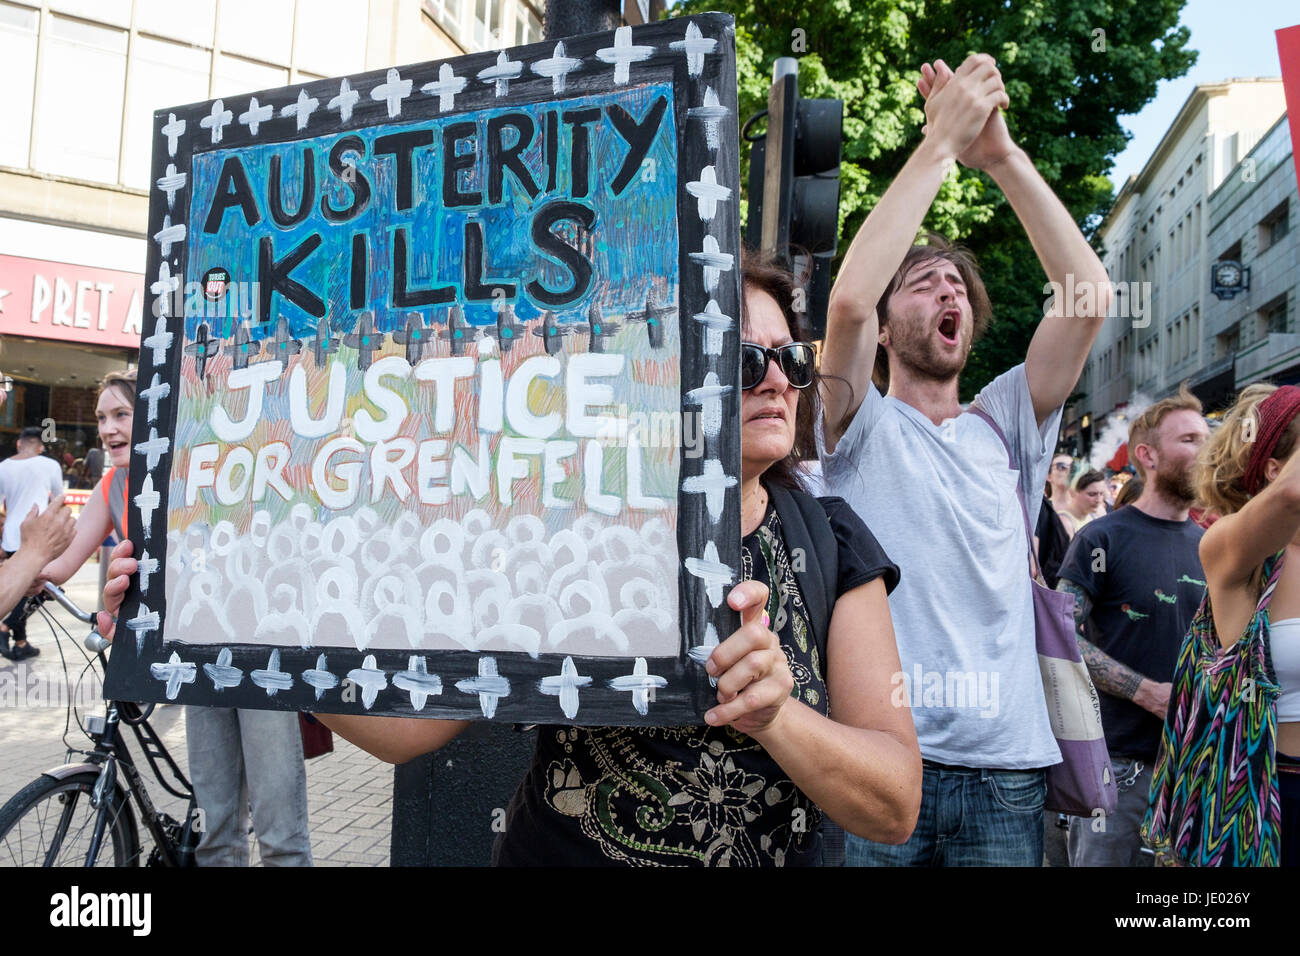 Bristol, UK, 21st June, 2017. Protesters carrying placards are pictured as they take part in a Austerity kills, Justice for Grenfell protest march. The demonstration was organised by the Bristol People's Assembly and ACORN community union who say that the protest aims to unite Bristolians in a very visible solidarity with the victims of the Grenfell fire. The organisers deliberately held the protest on the 21st June to coincide with the rescheduled  'Queen's speech' in Parliament. Credit: lynchpics/Alamy Live News Stock Photo